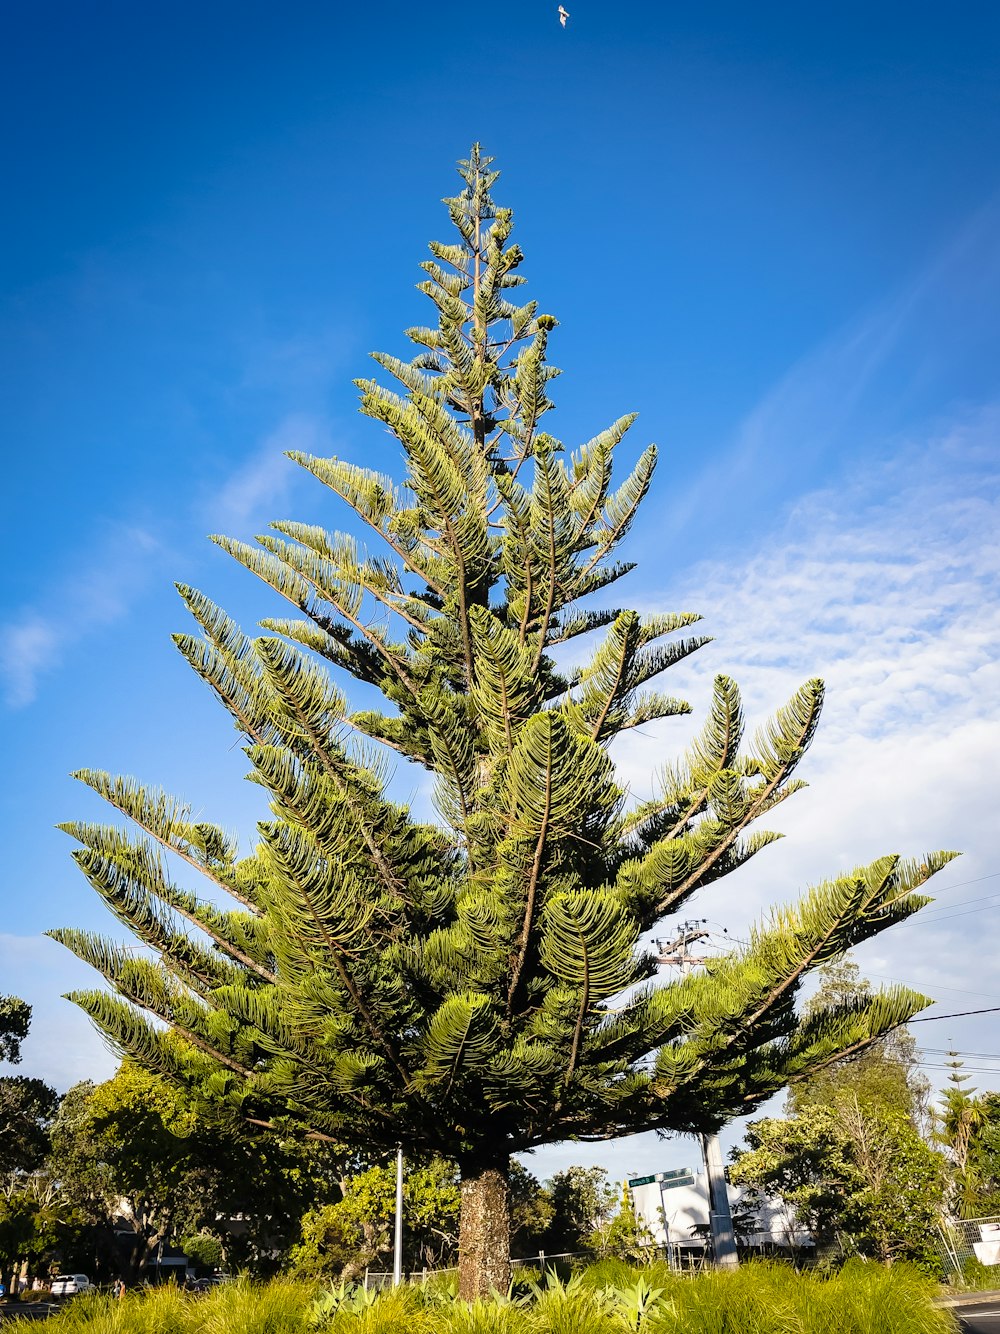 green pine tree under blue sky during daytime